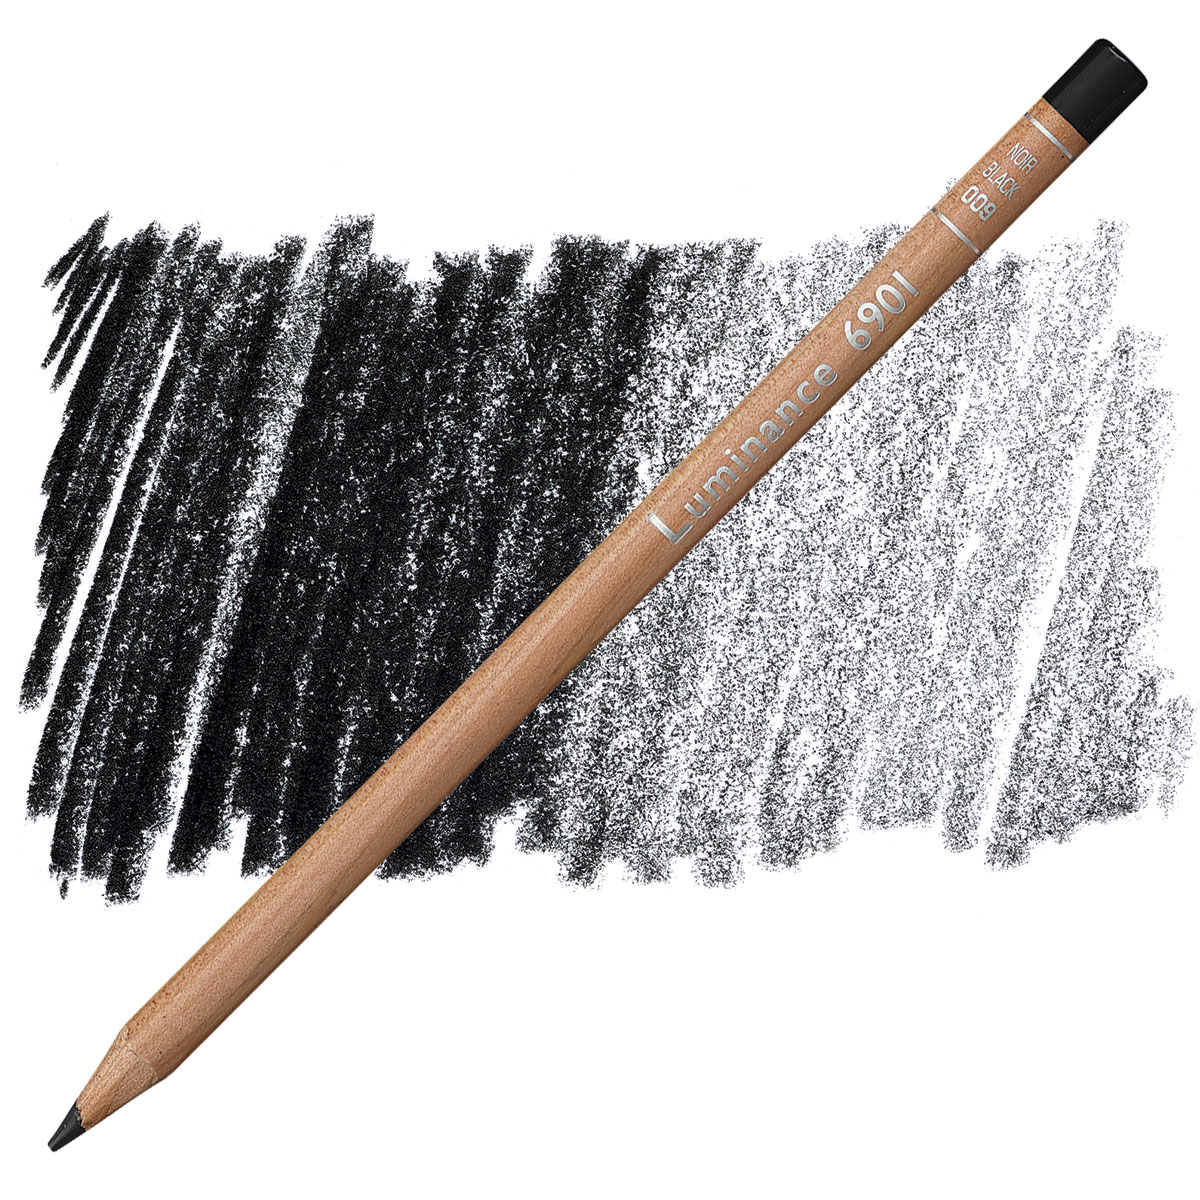 Caran d'Ache Luminance Colored Pencils and Sets